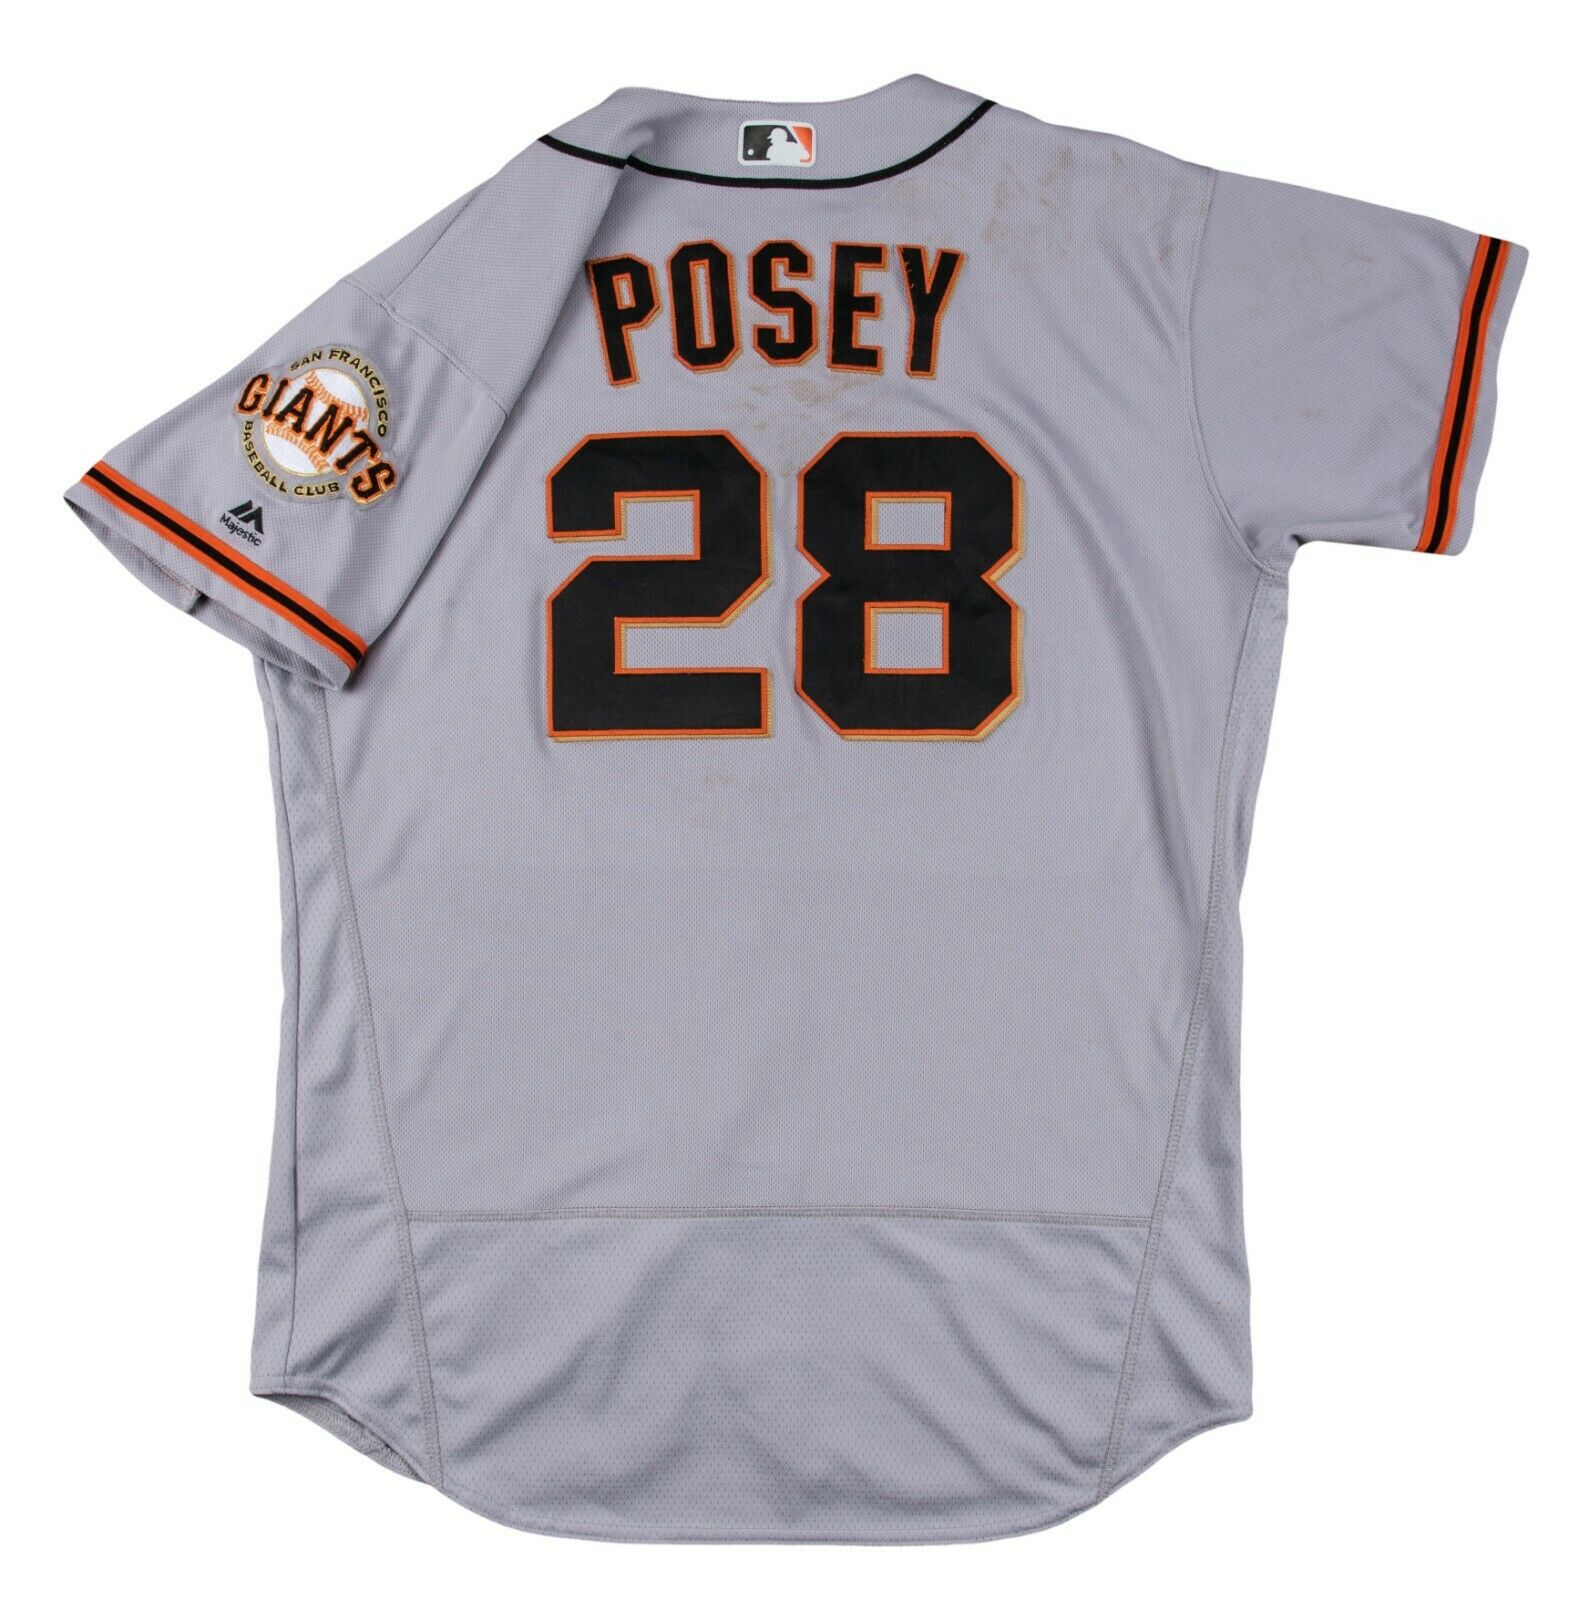 Buster Posey Jersey, Authentic Giants Buster Posey Jerseys